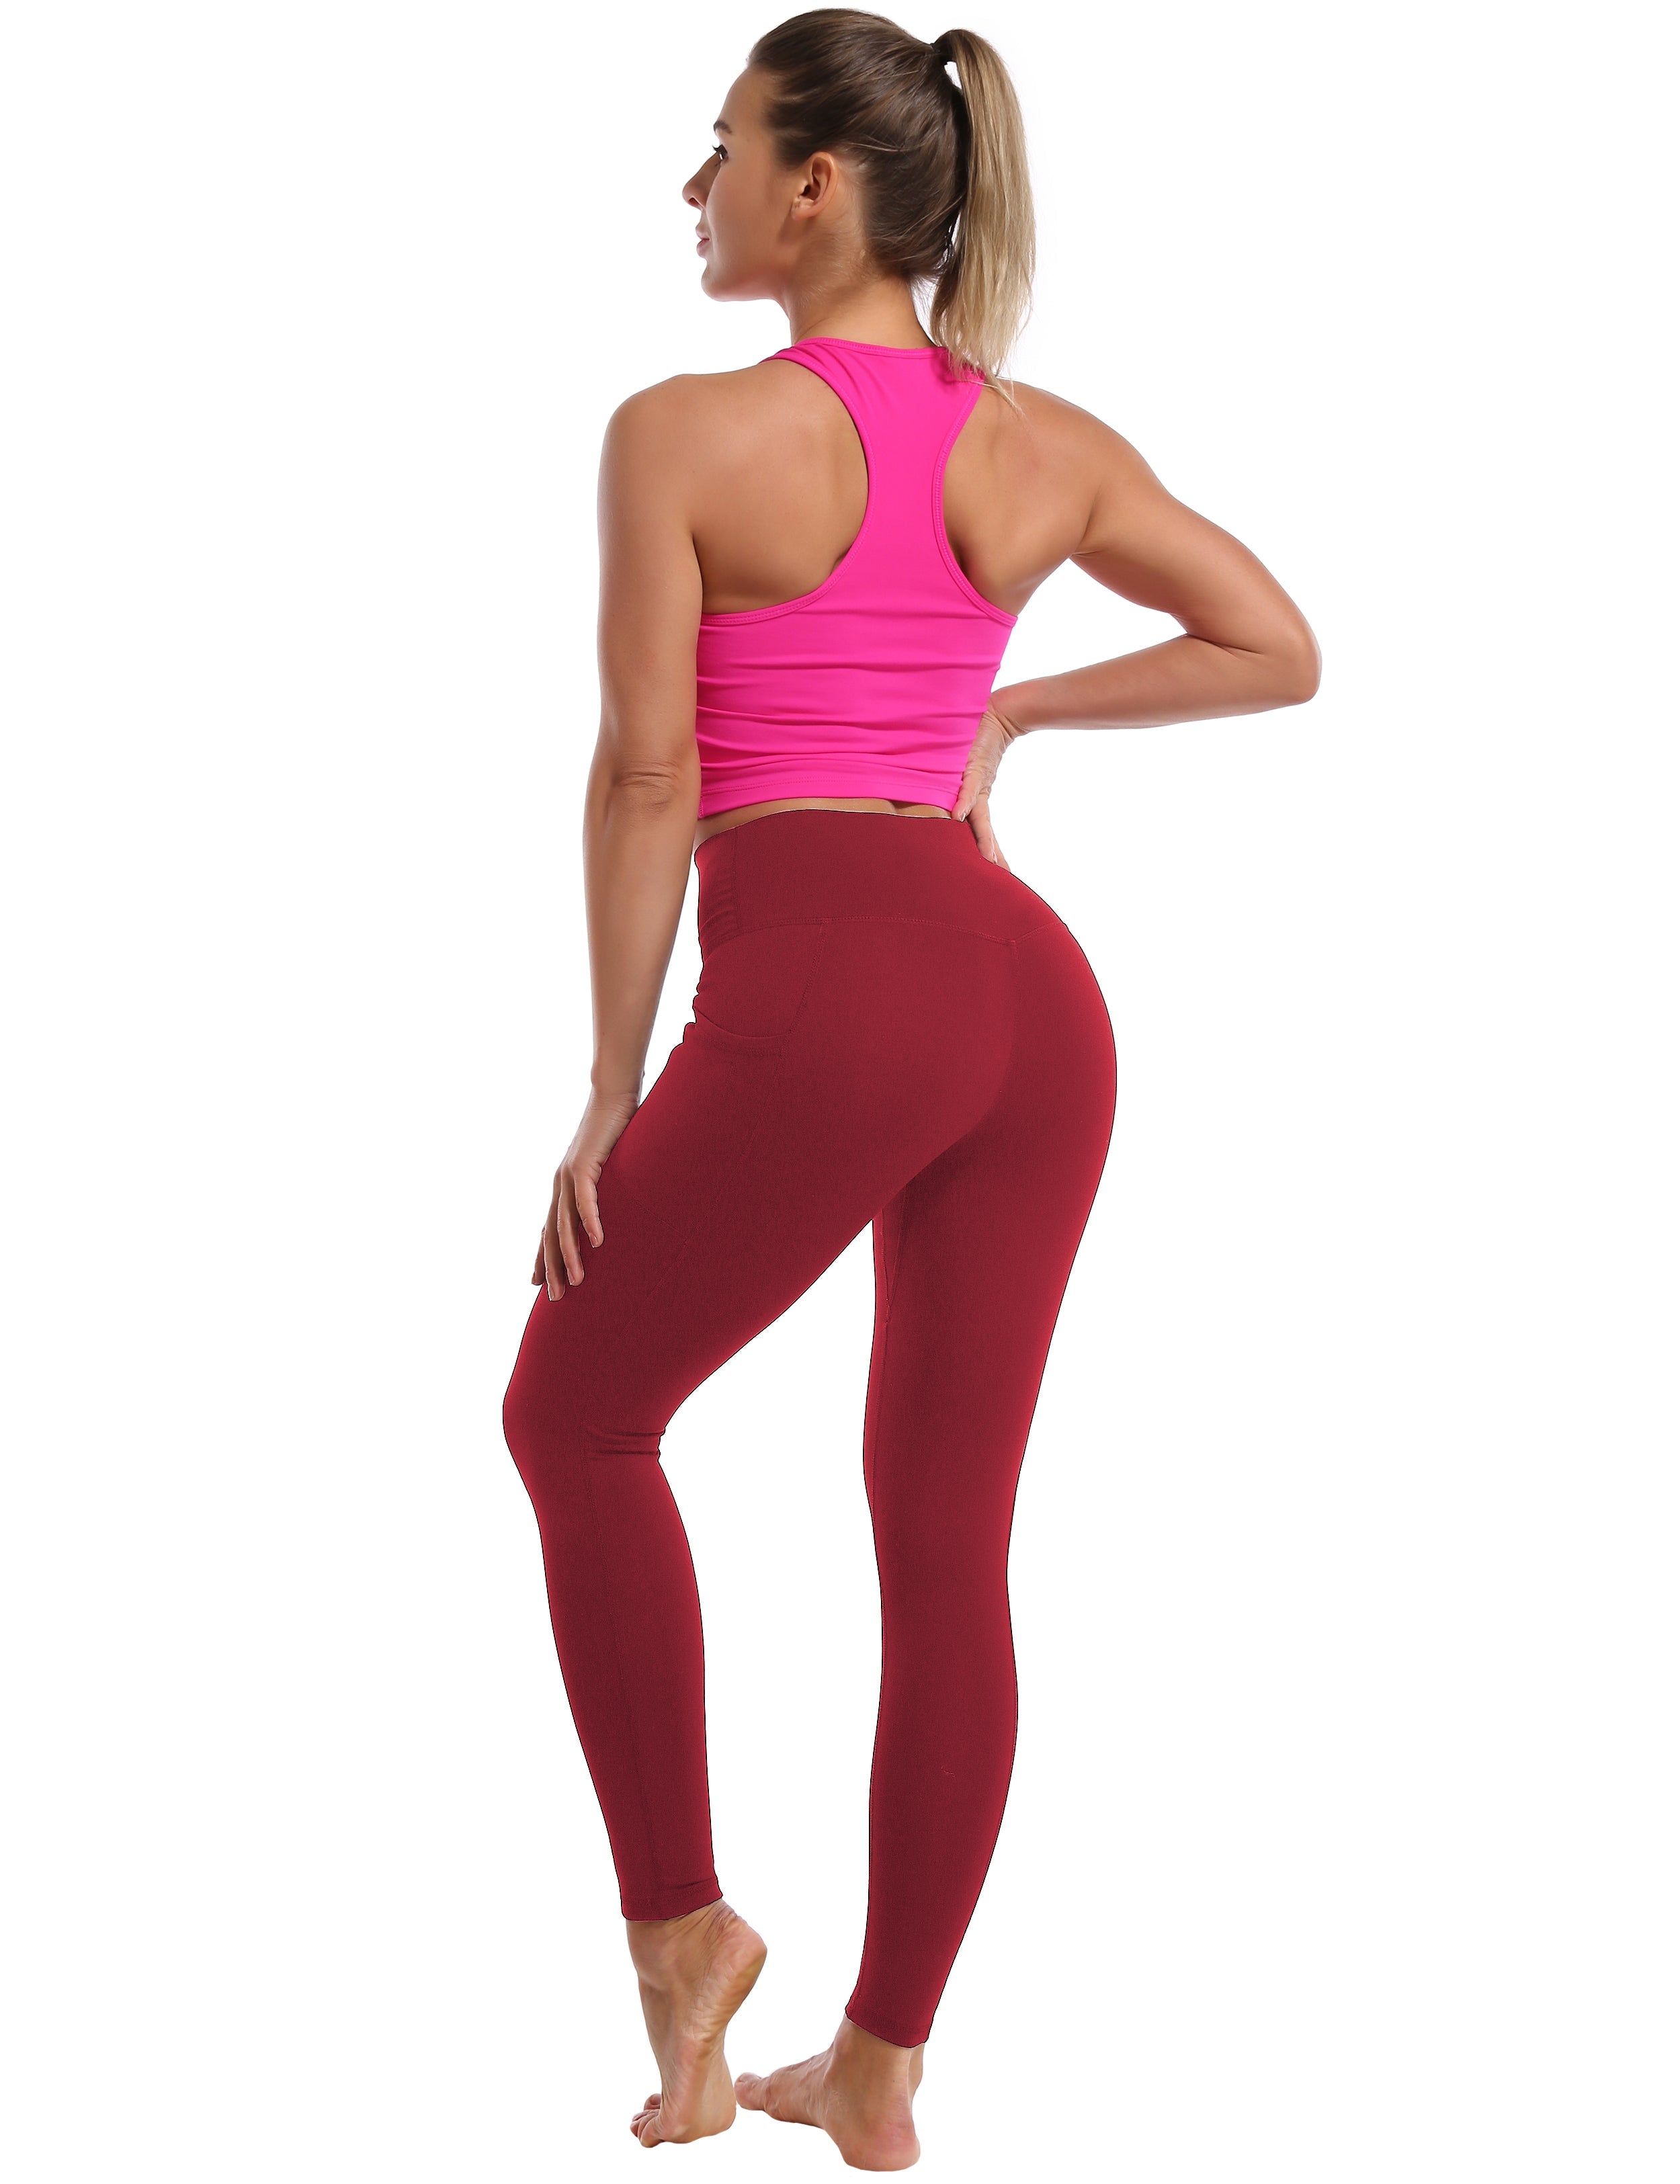 High Waisted Jogging Pants 7/8 Length Leggings with Pockets red_Jogging